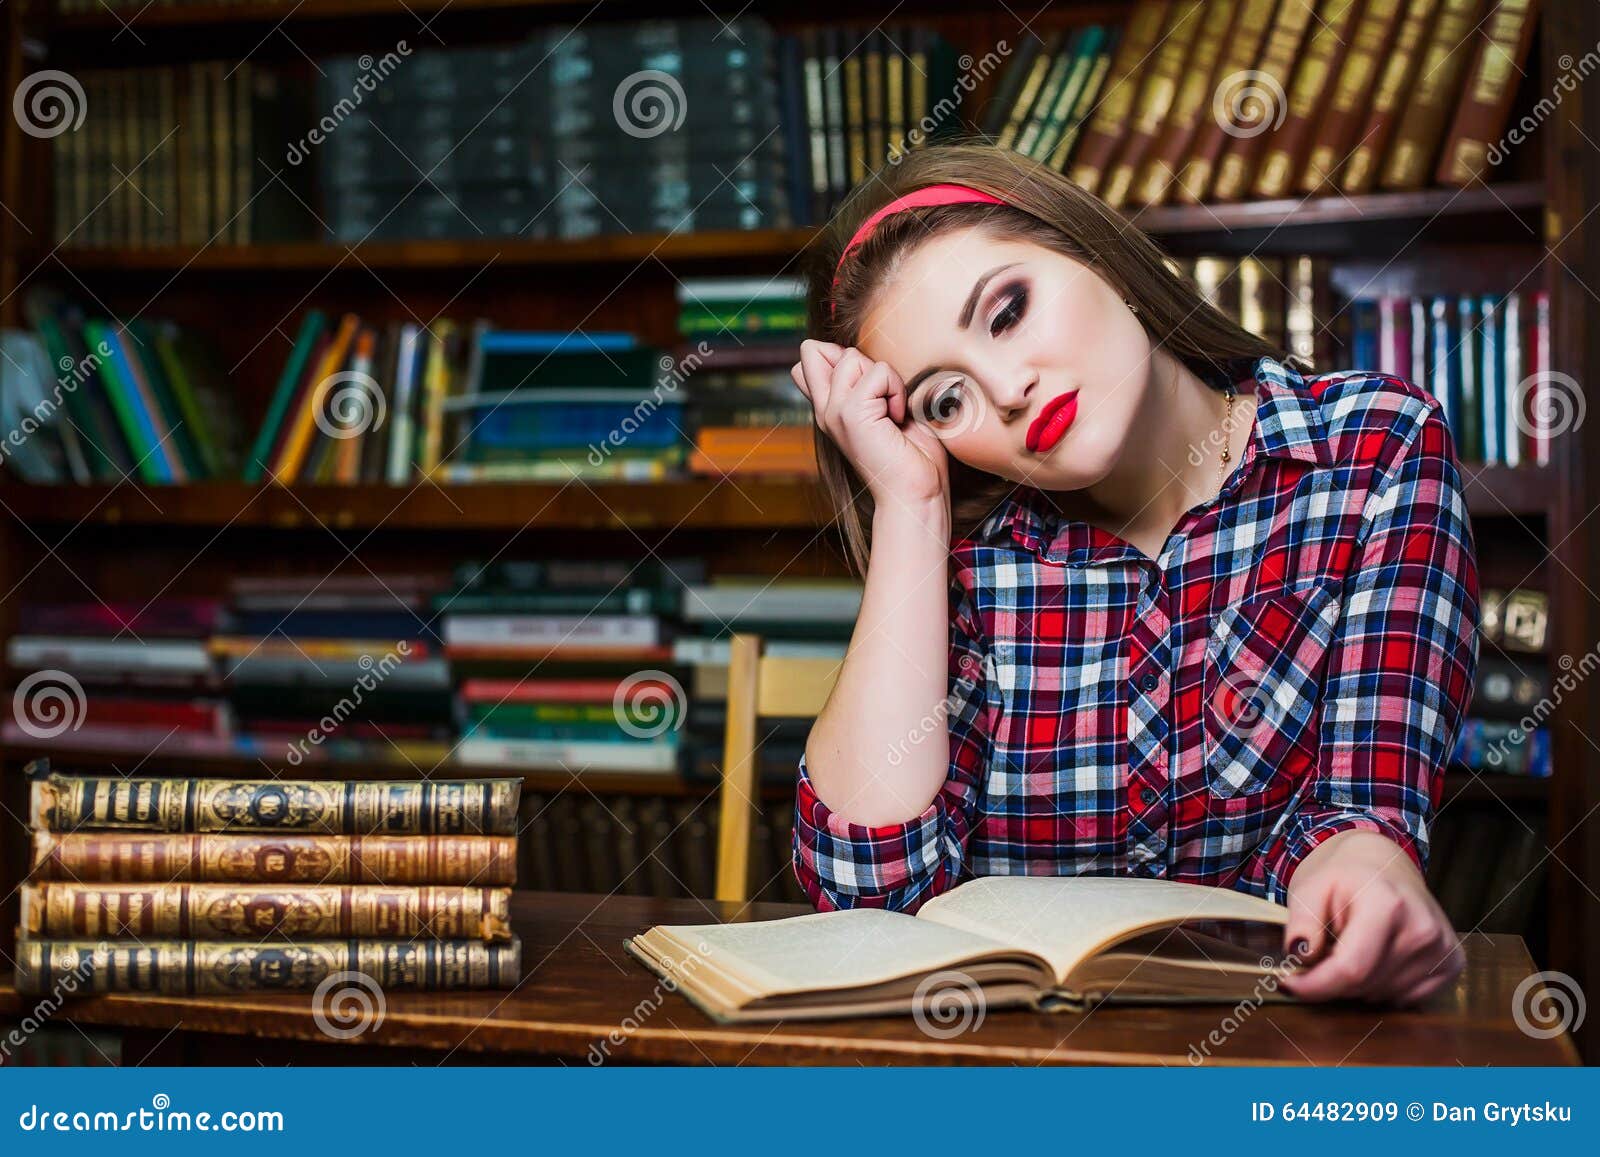 Clever Female Student Girl Sitting In Library With Books. Stock Image - Image of ...